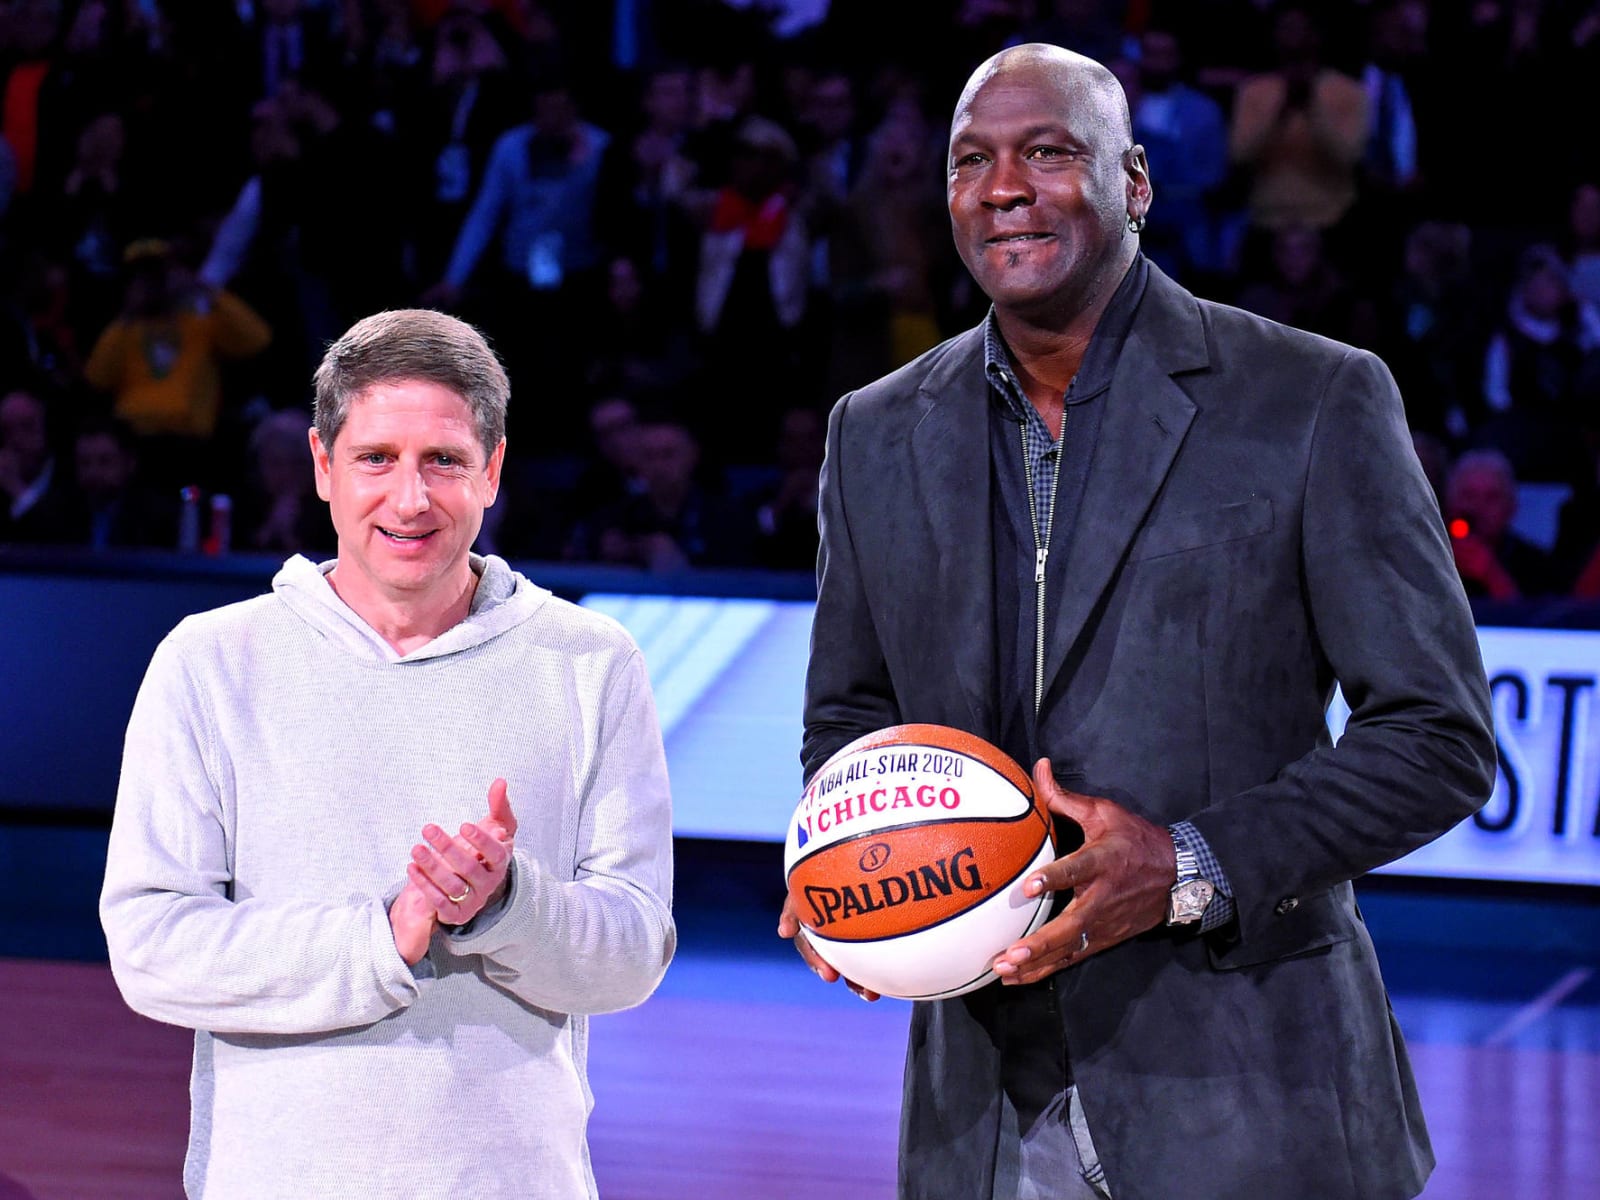 Michael Jordan card from 1992 All-Star Game sold for $1.4M